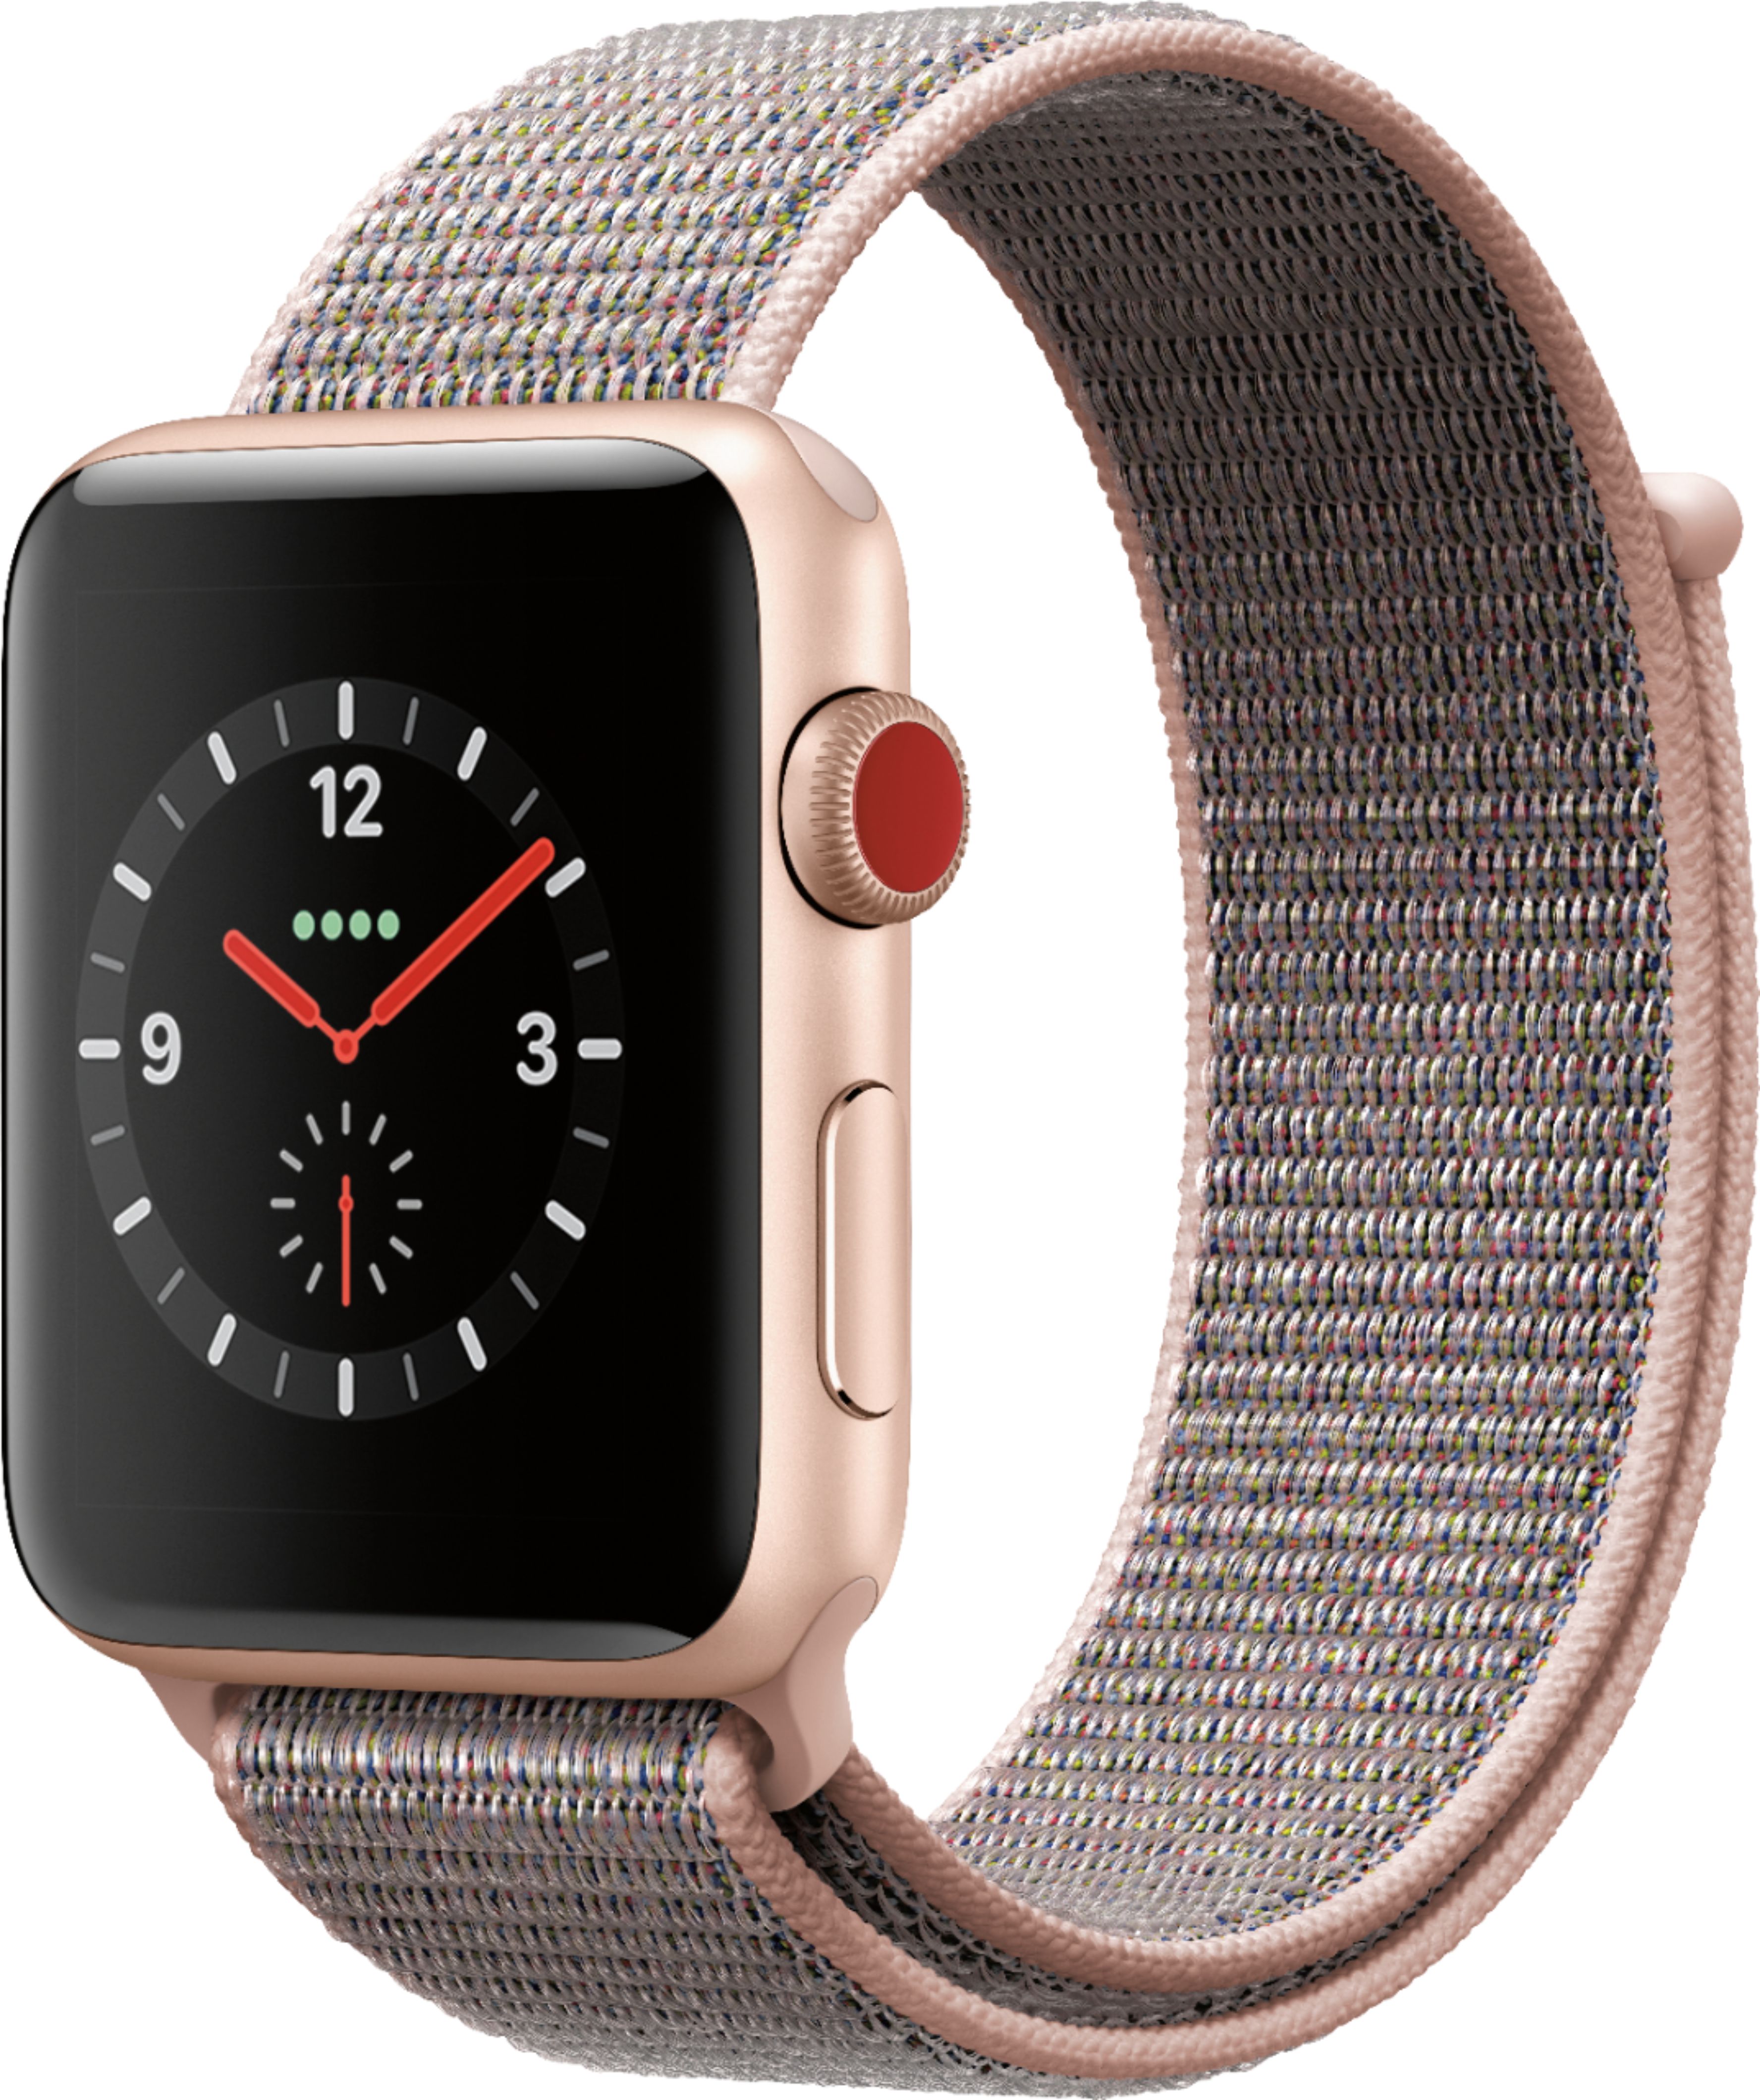 Best Buy: Apple Watch Series 3 (GPS + Cellular) 42mm Gold Aluminum Case  with Pink Sand Sport Loop Gold Aluminum (Verizon) MQK72LL/A